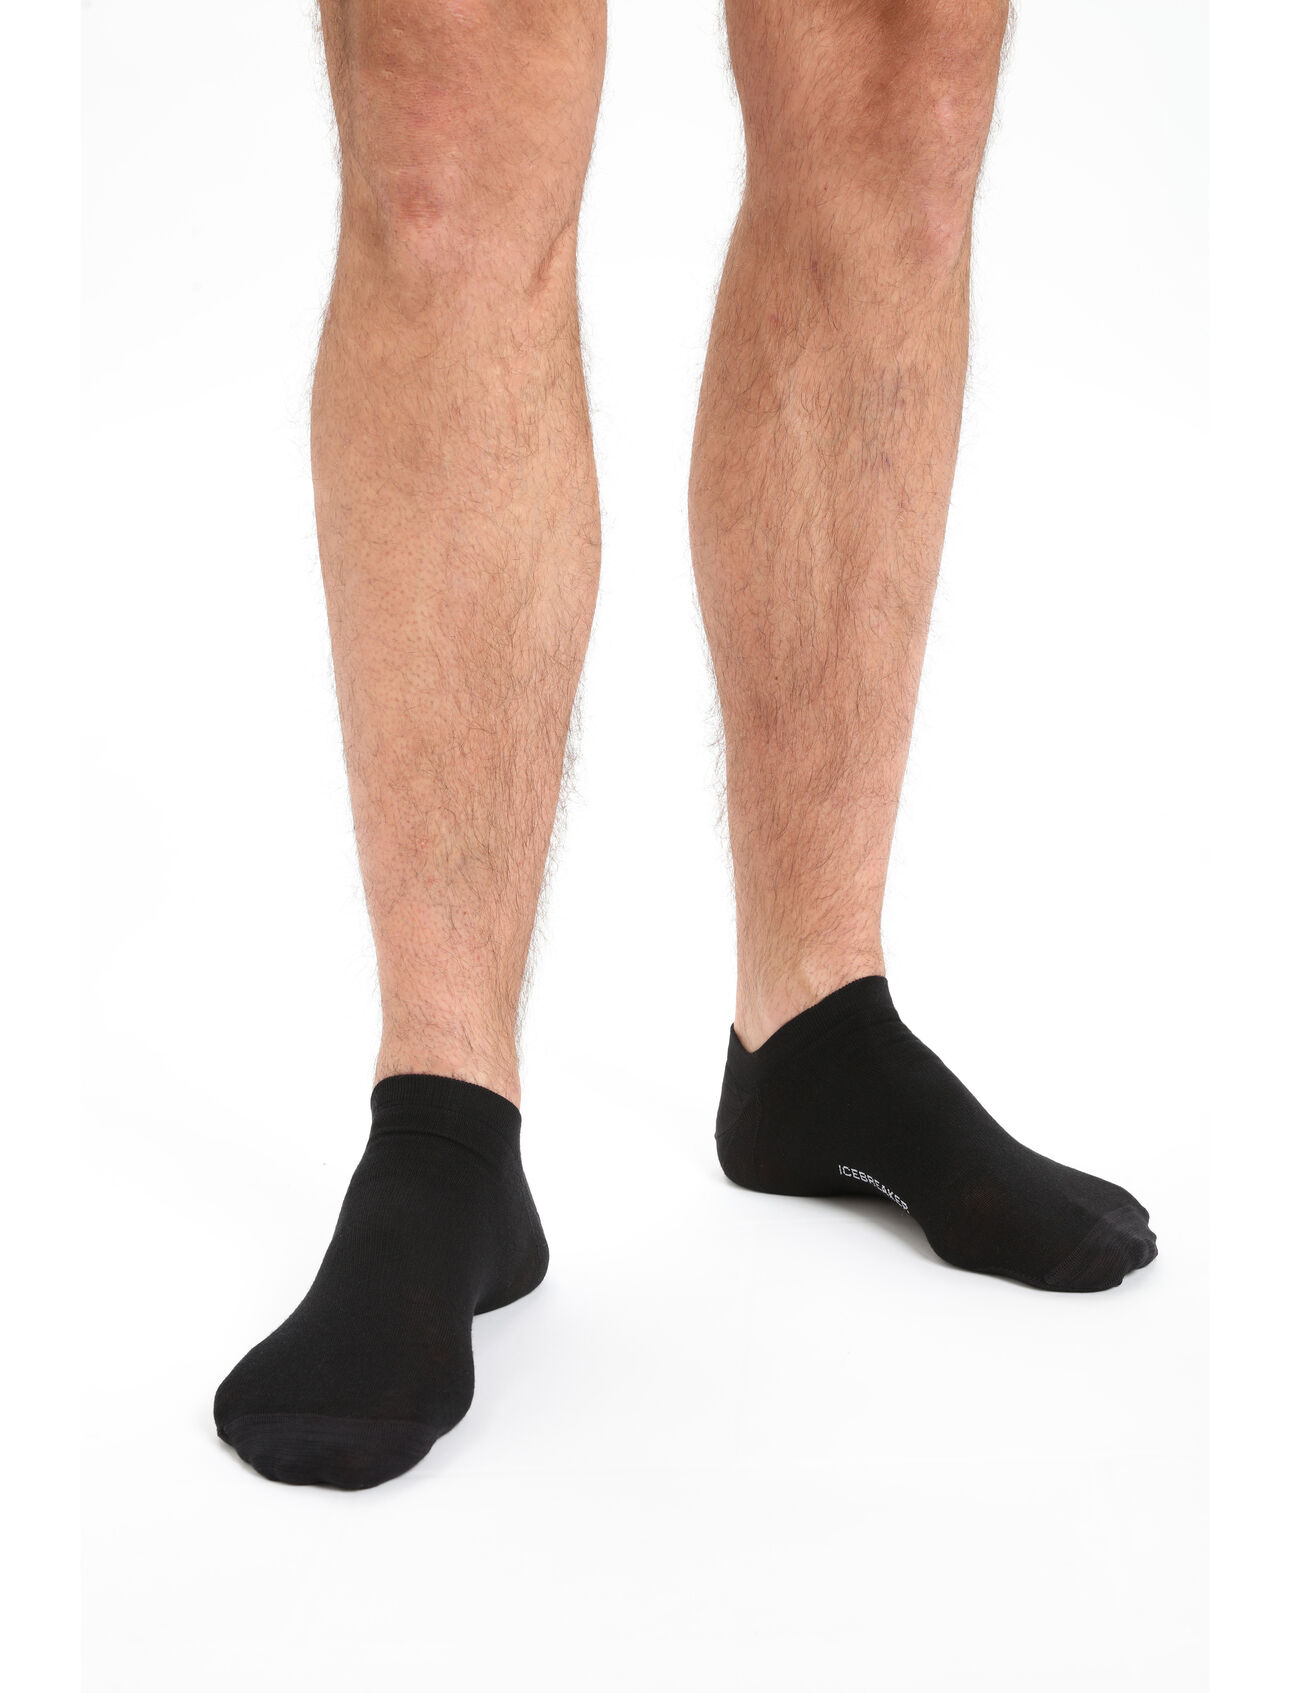 Mens Merino Lifestyle Fine Gauge No Show Socks Lightweight casual socks perfect for everyday use, the Lifestyle Fine Gauge No Show combines premium merino wool comfort with a durable construction.